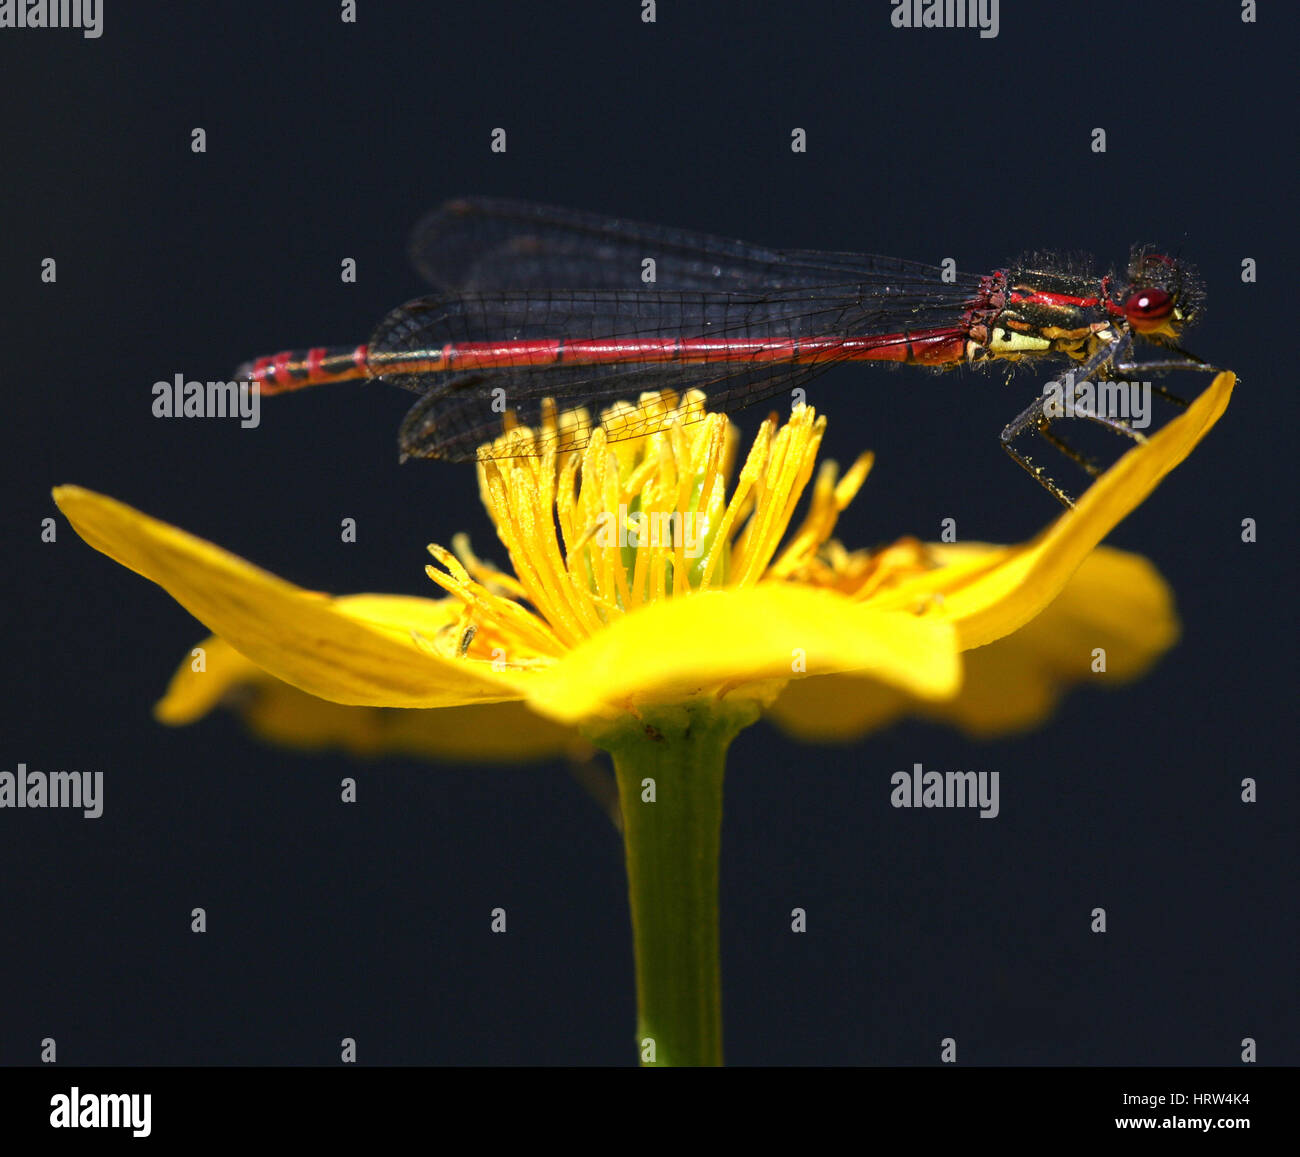 Red damselfly .Perched on Marsh Marigold ( Caltha). Macro close up photography.  Full frame. Dark background. Stock Photo